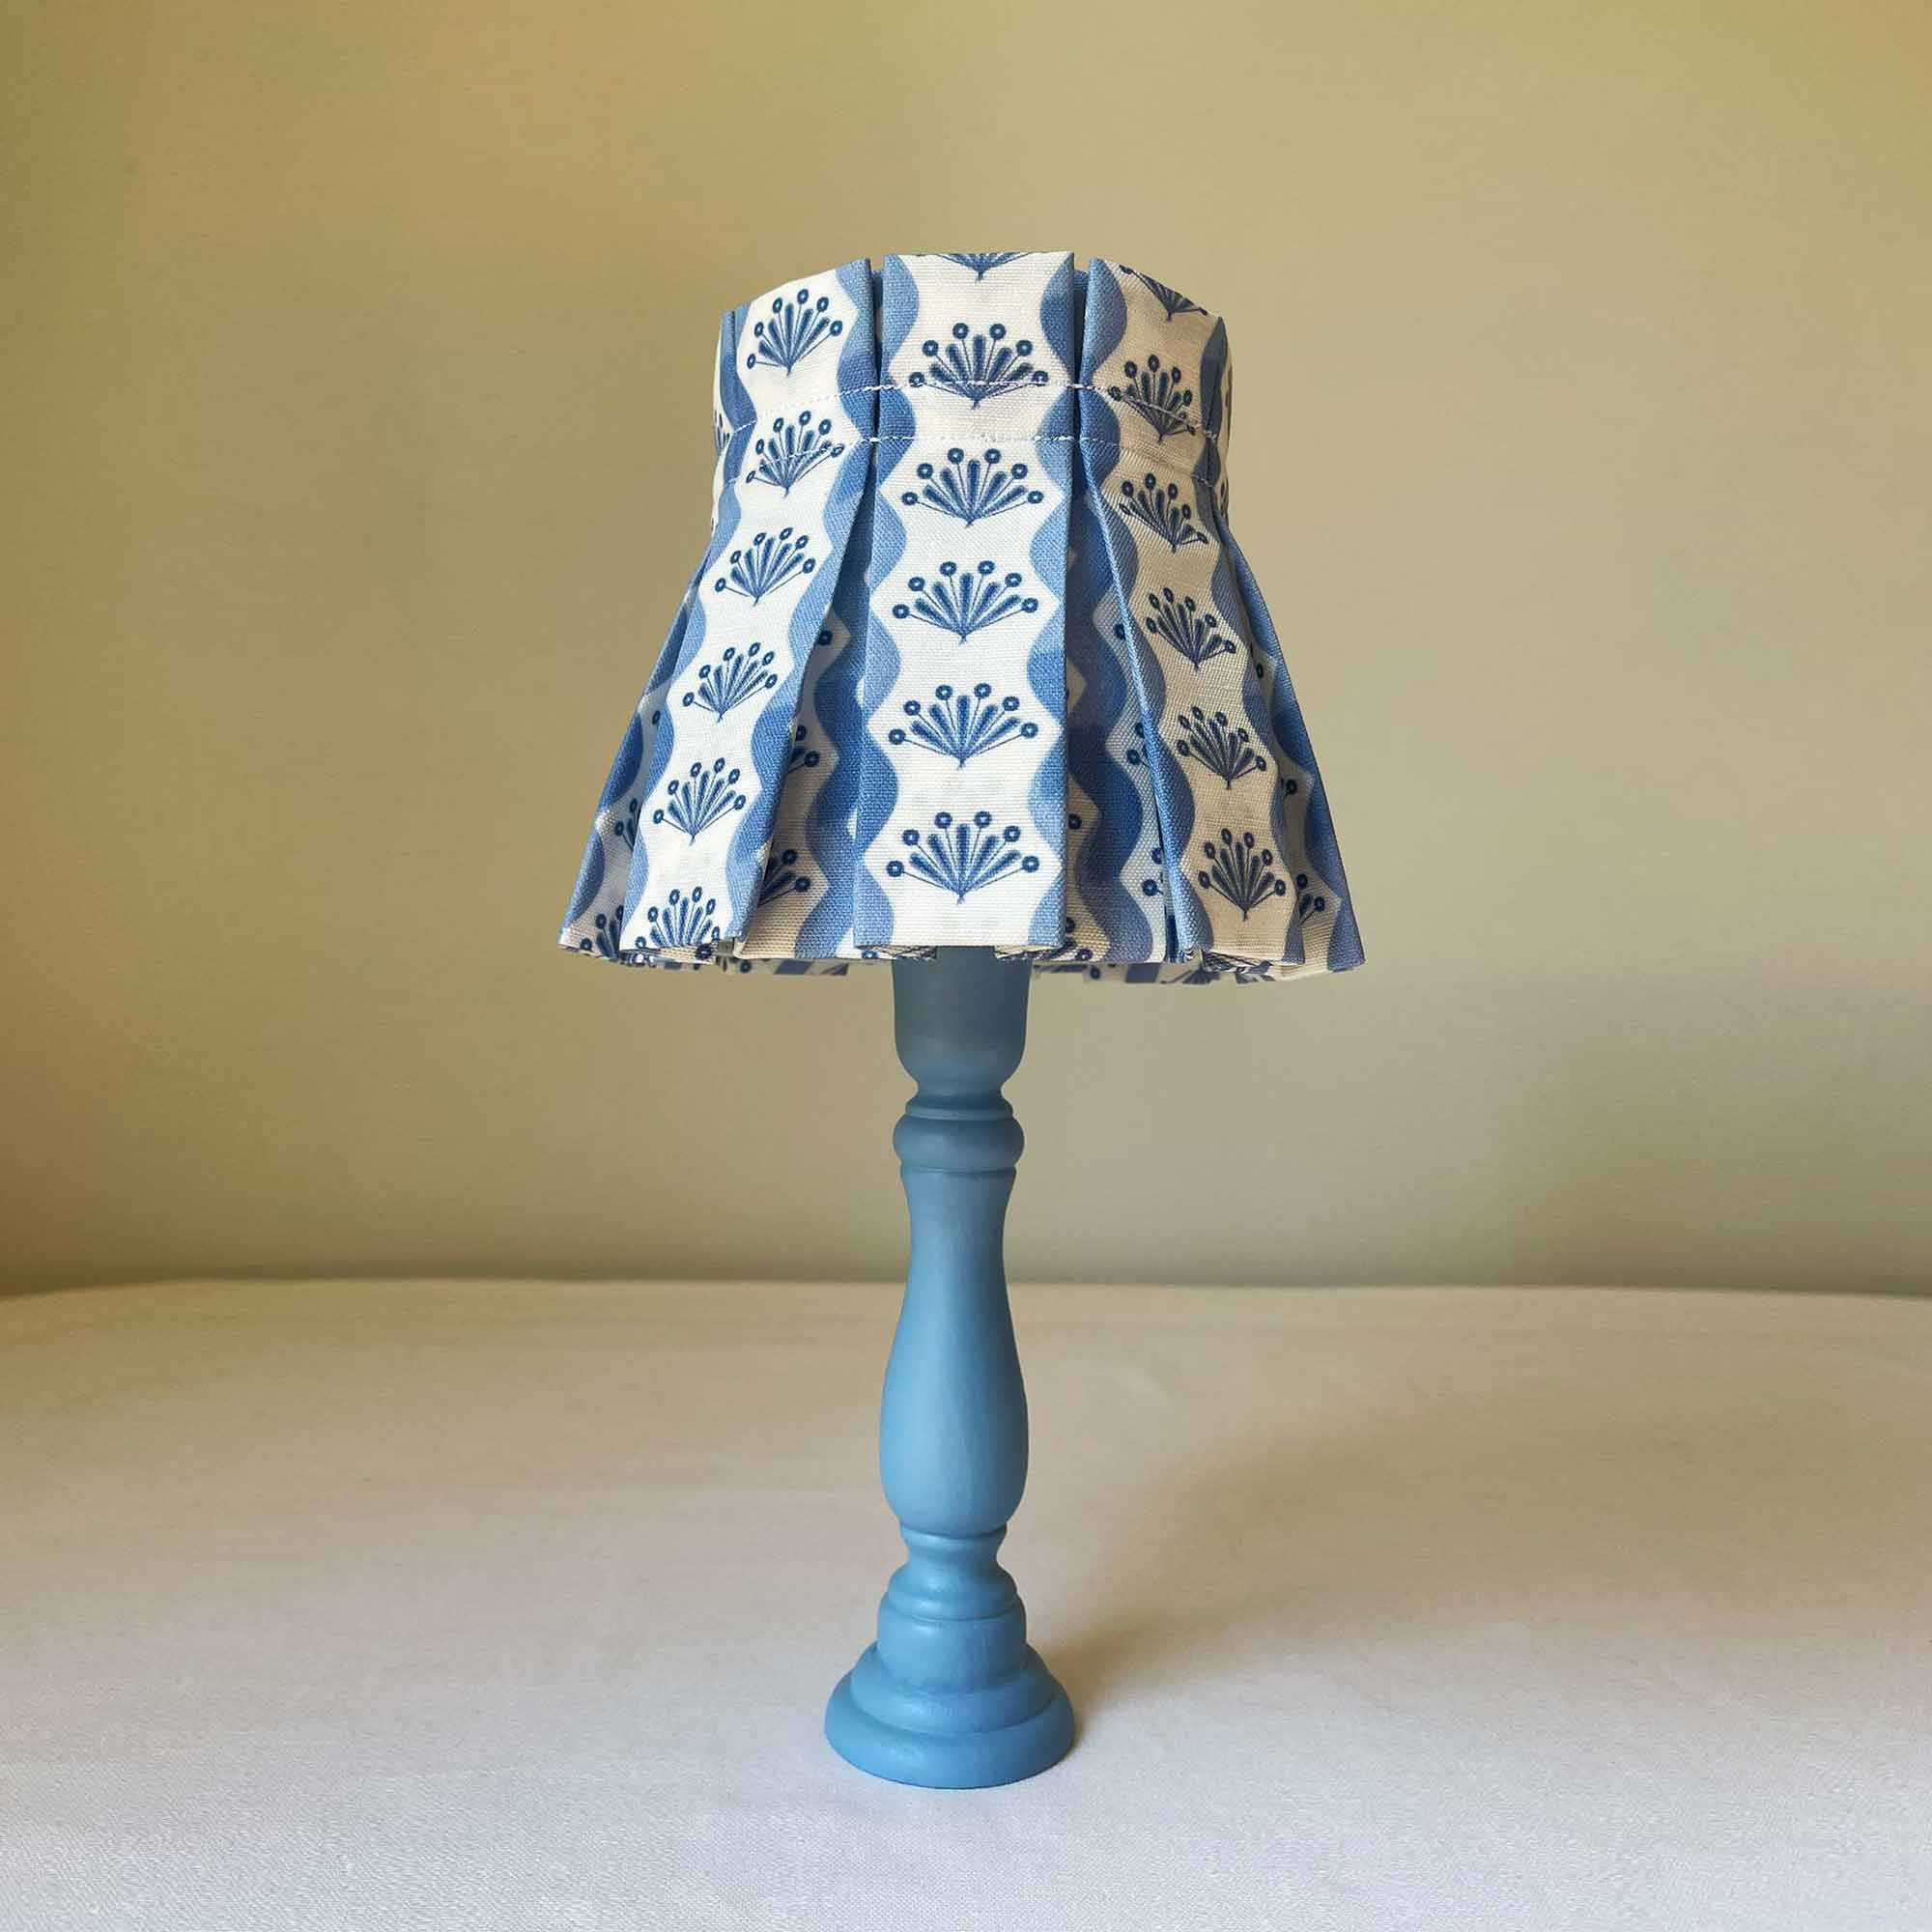 cute vibrant rich blue floral lampshade in pleat style and perfect for wall scones and tiny table lamps